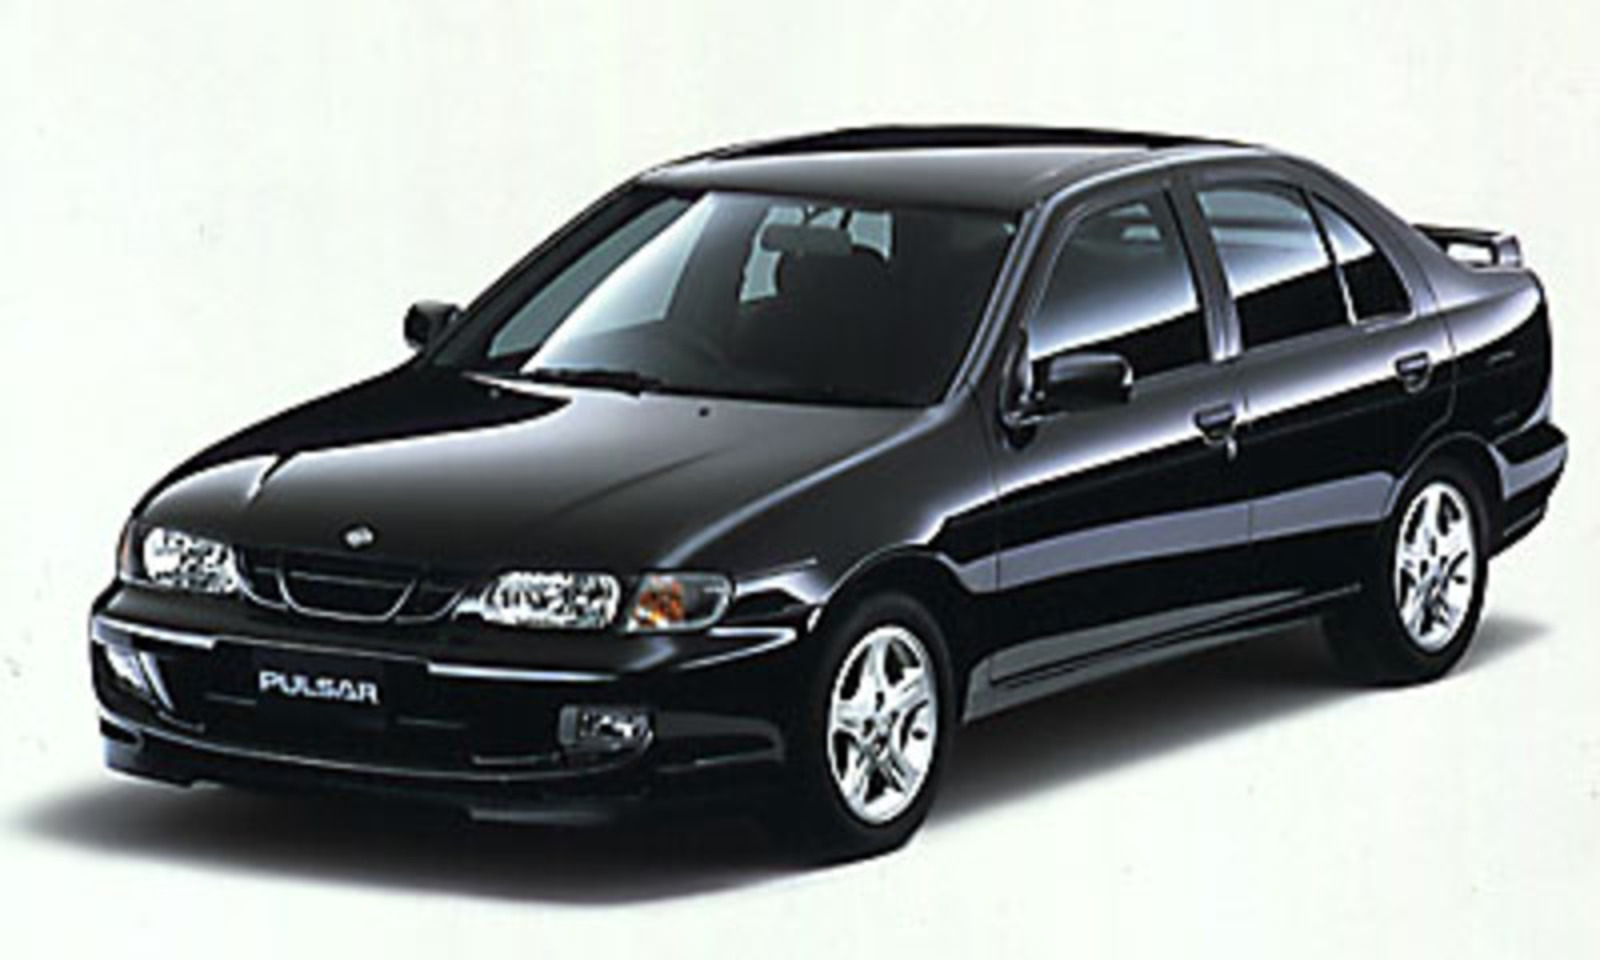 Nissan Lucino VZ-R. View Download Wallpaper. 400x240. Comments